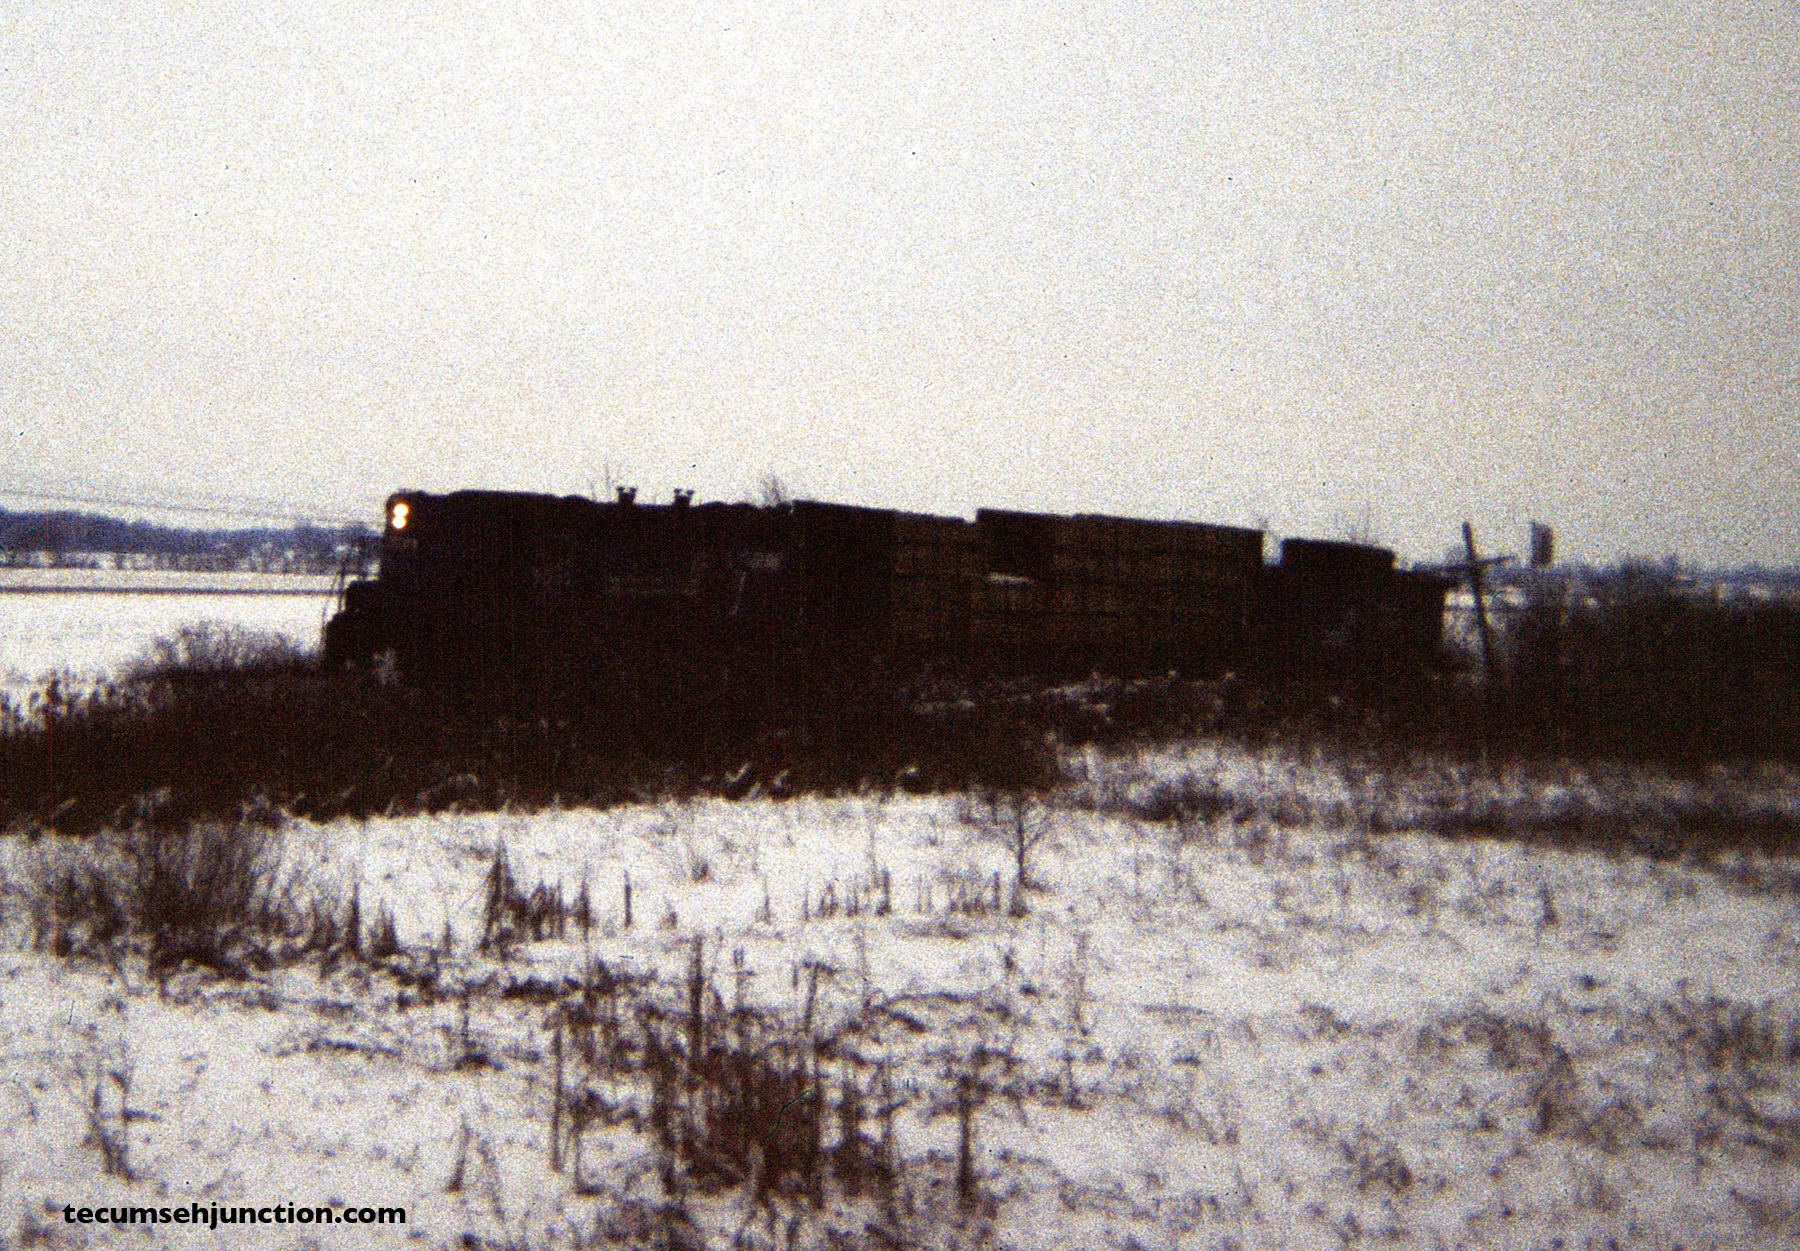 Having dropped off cars to the Lenawee County Railroad, the train heads north with just one car, here passing the approach signal to the N&W diamonds at Raisin Center, Michigan.. (12 December 1981)